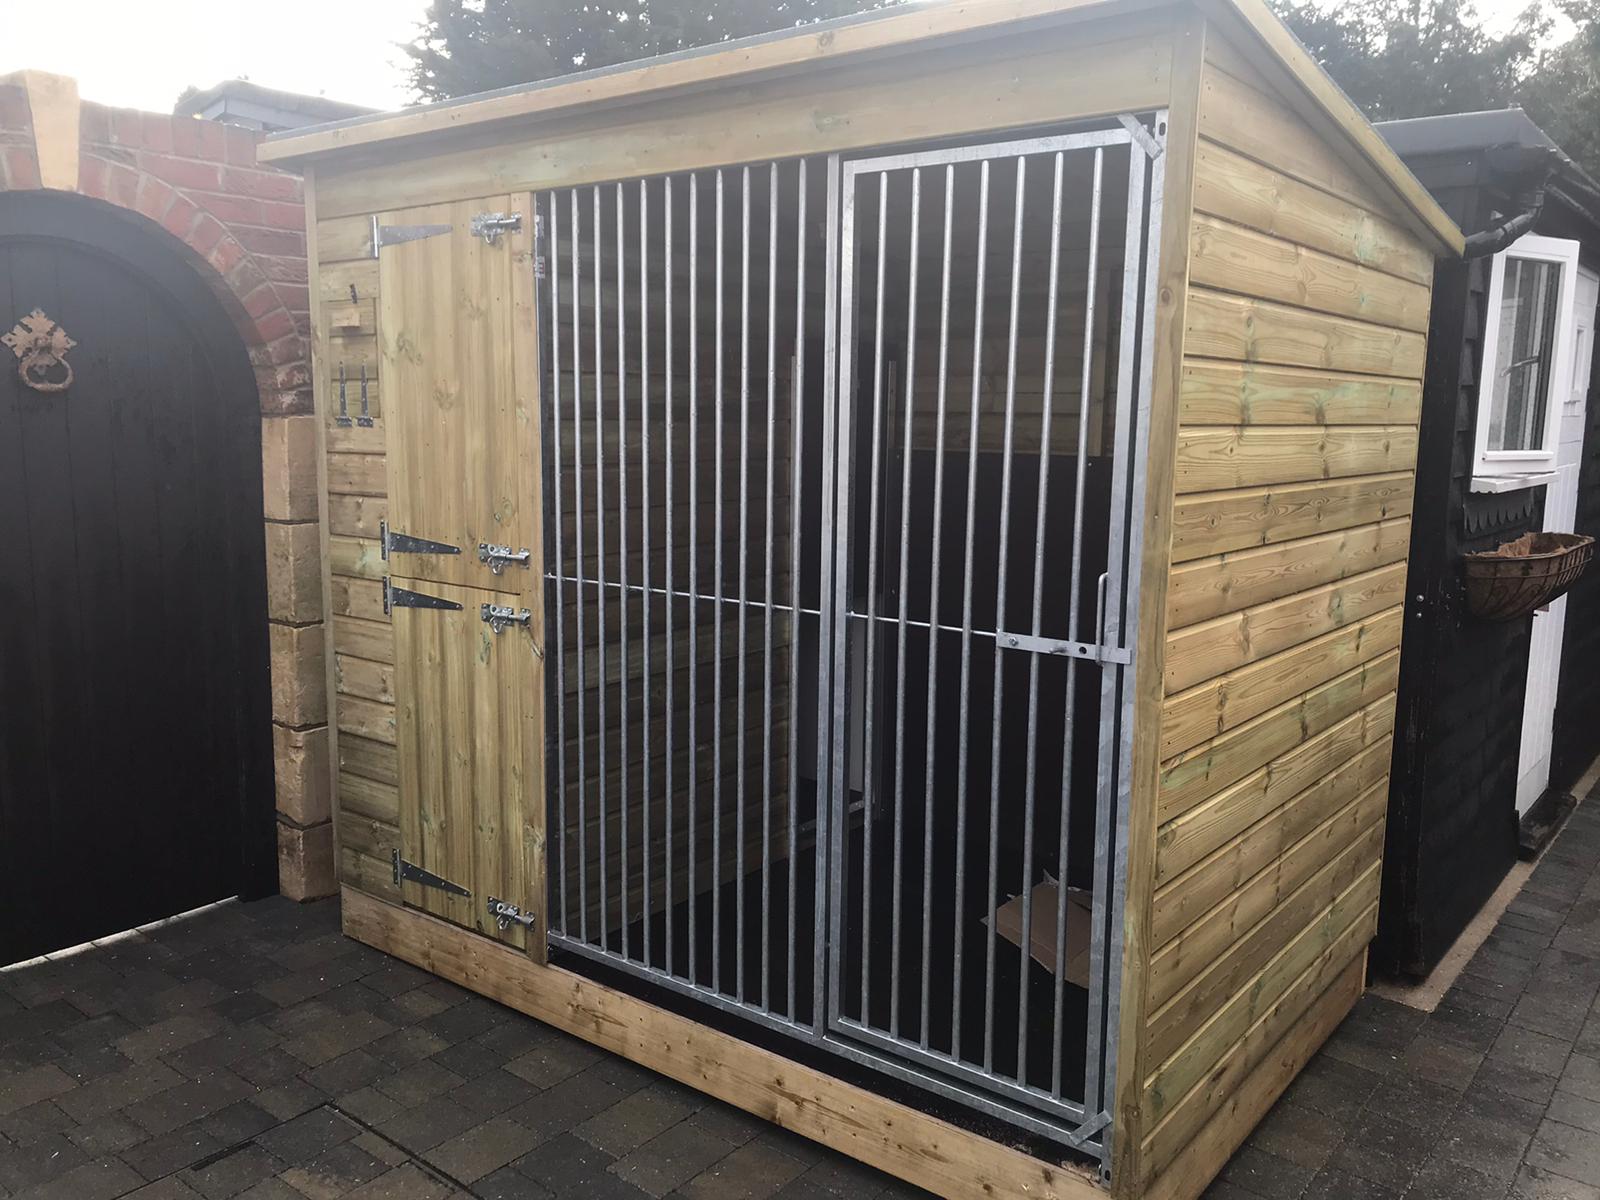 Stapeley Wooden Dog Kennel And Run 12ft (wide) x 5ft (deep) x 6'6ft (high)